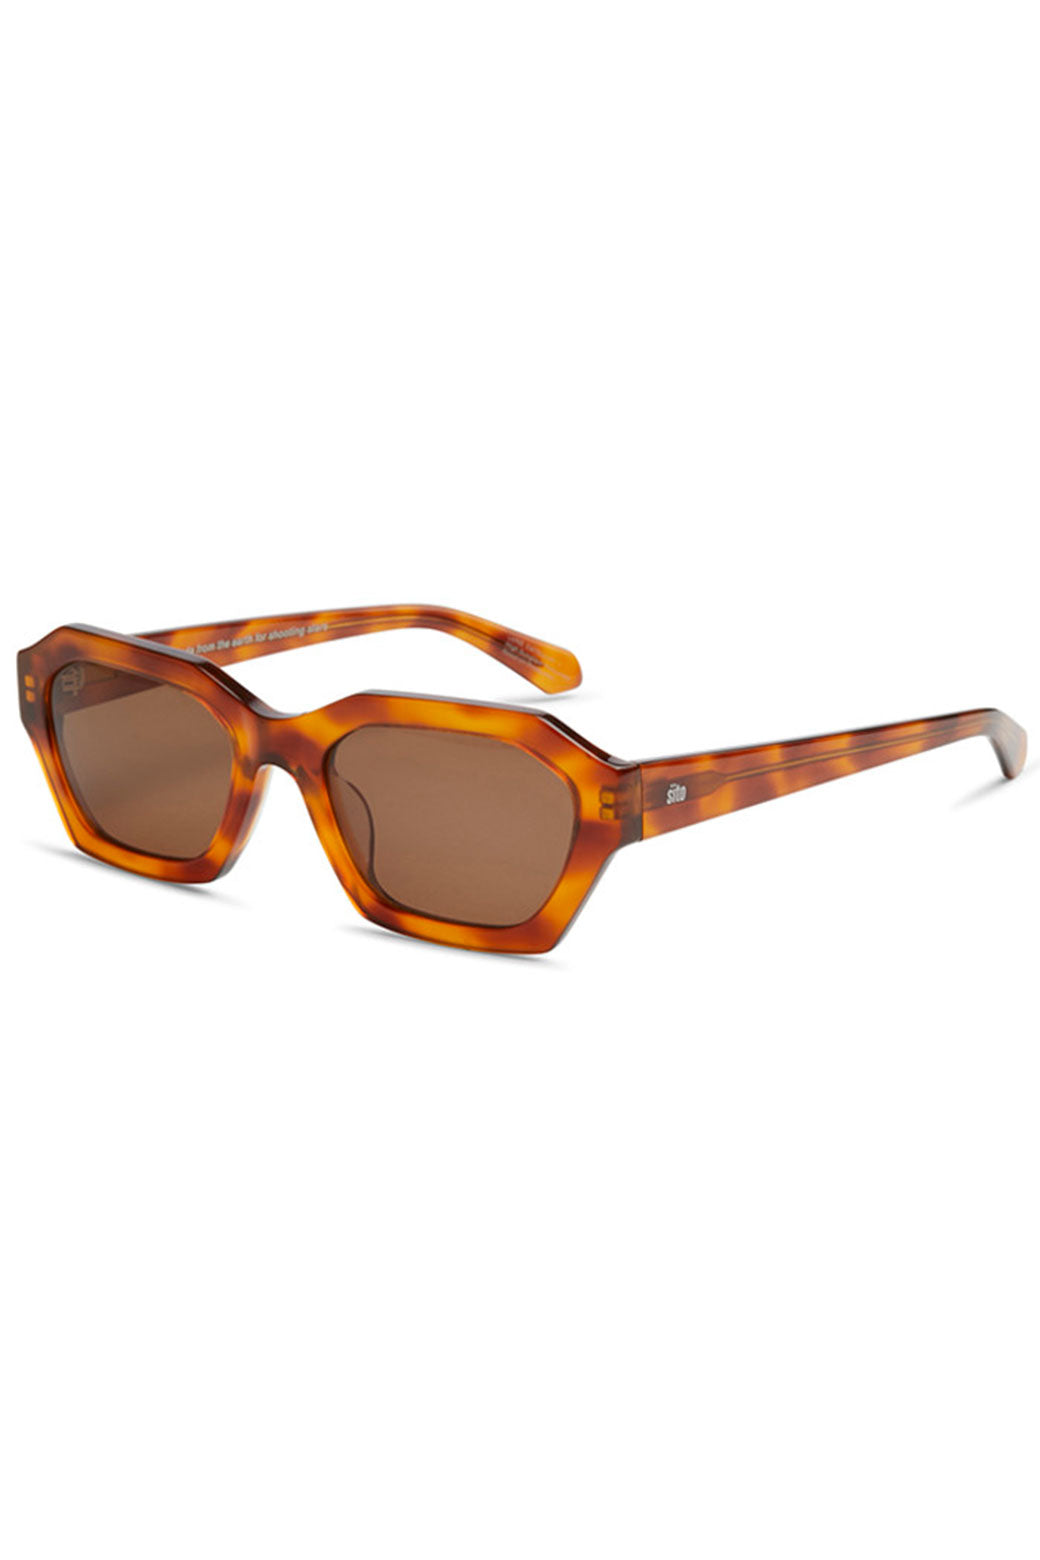 Sito Kinetic Amber Tort/Coffee